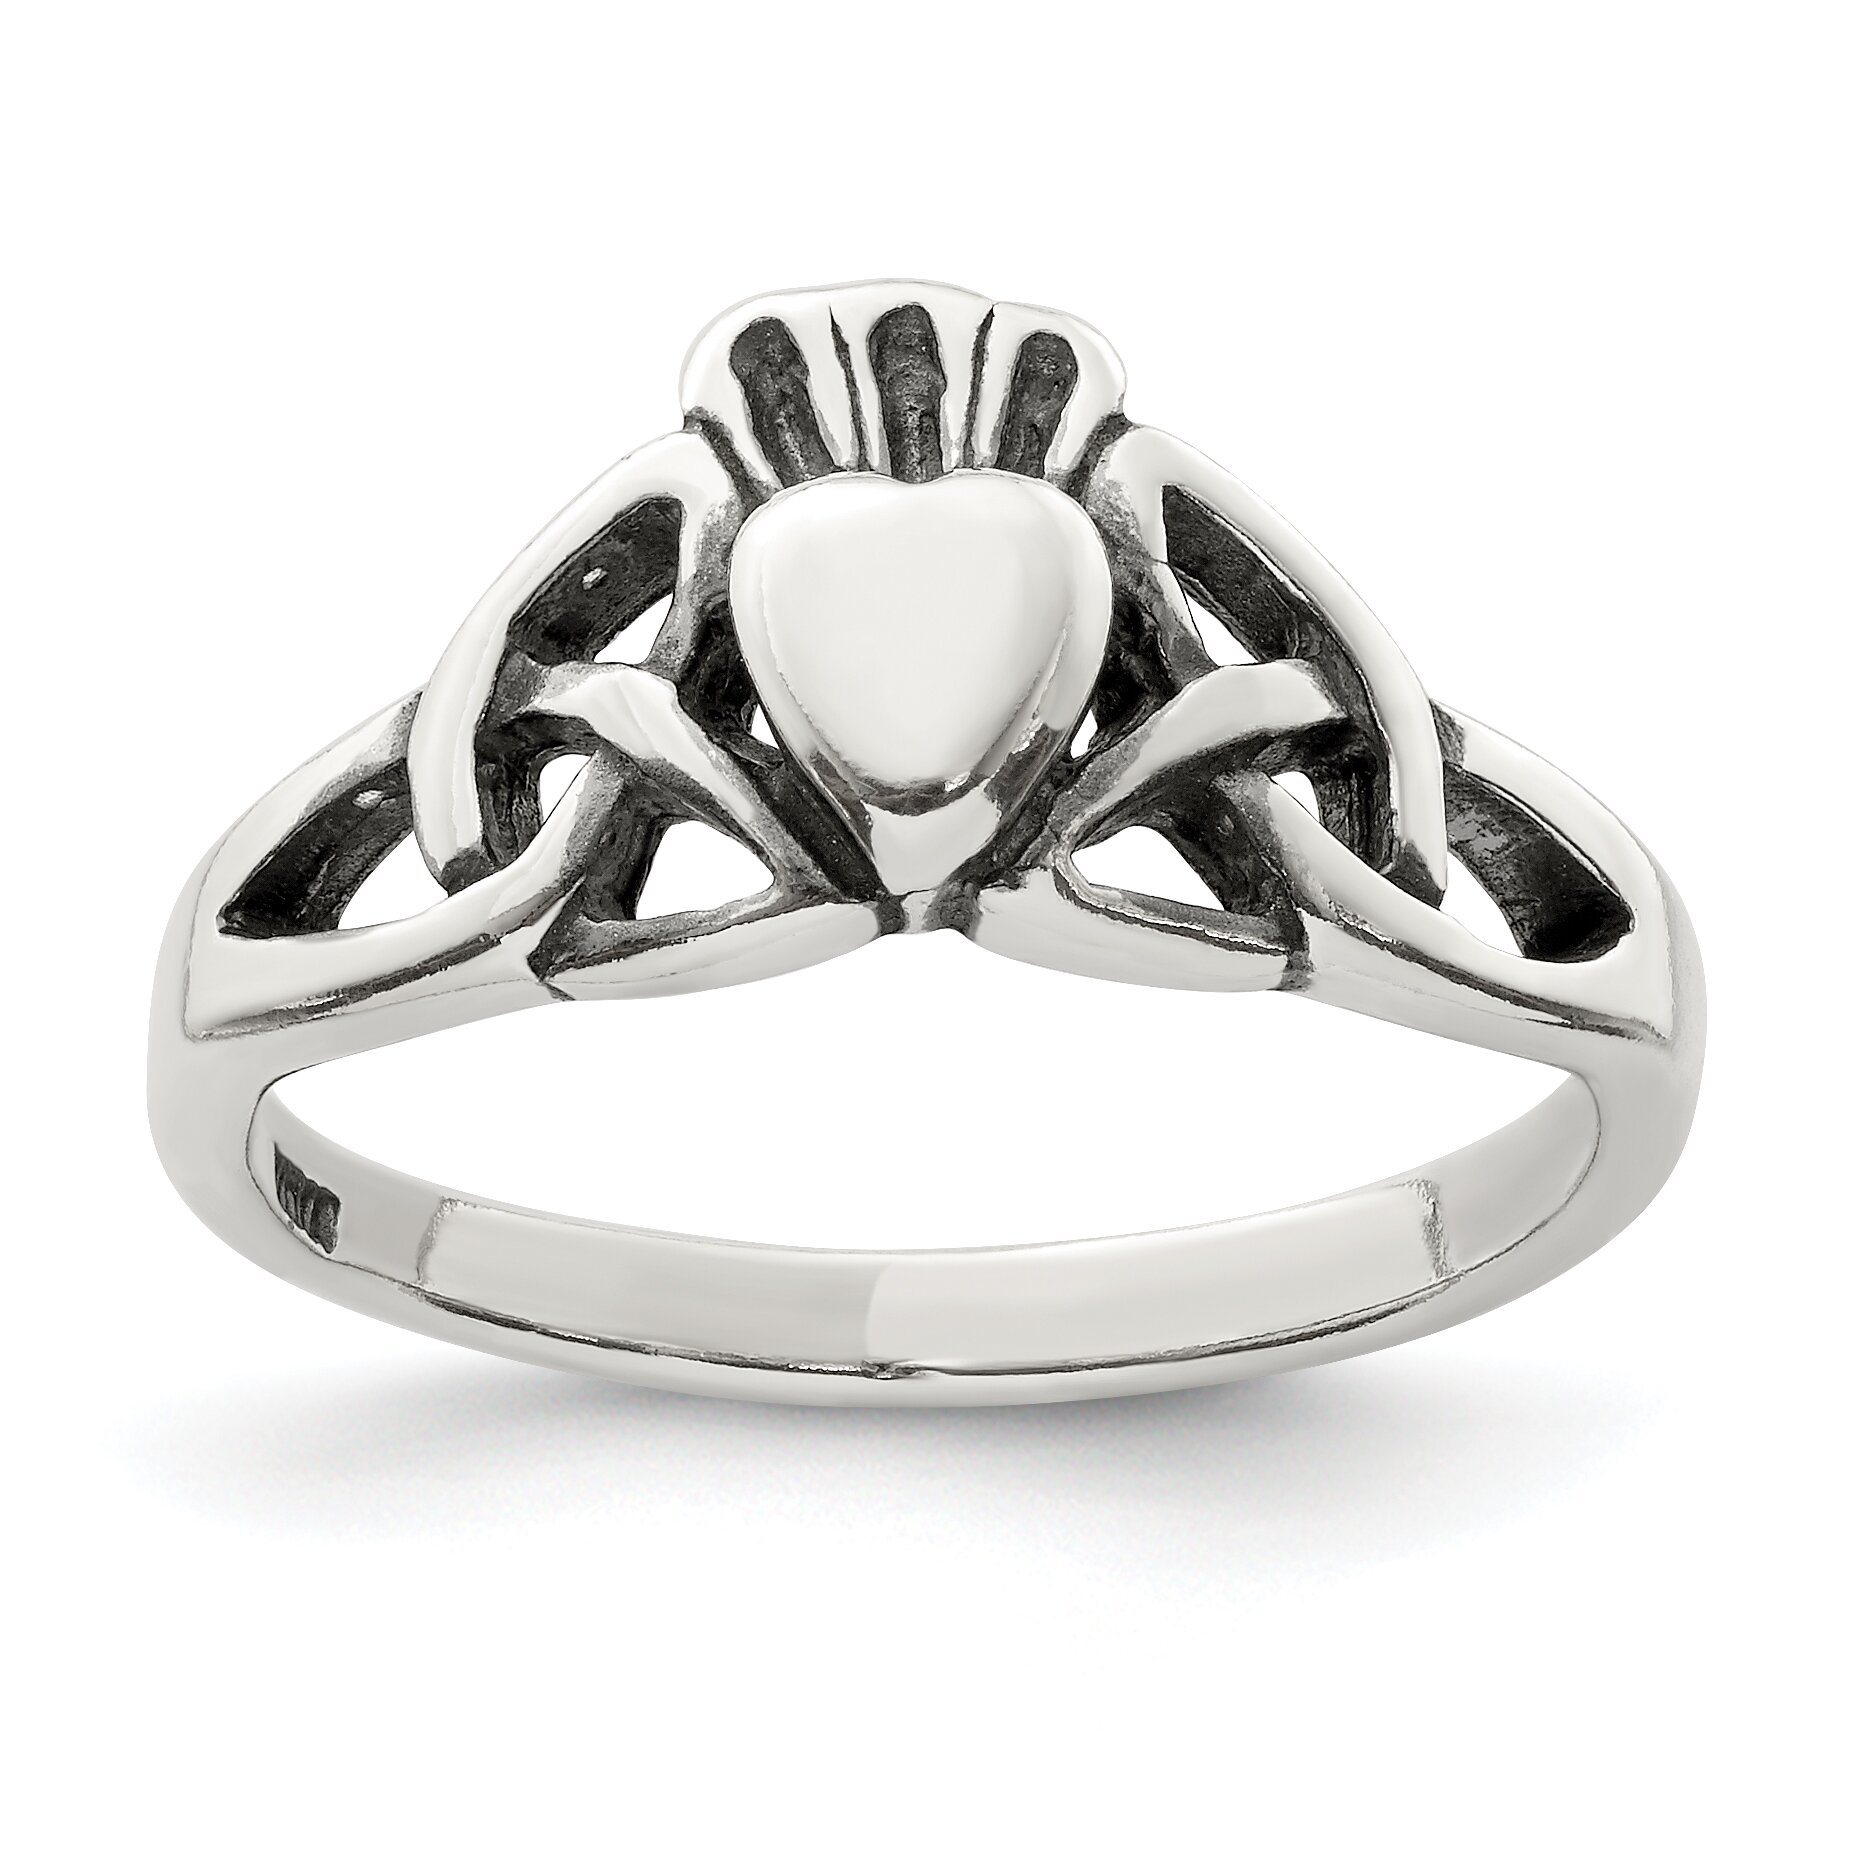 Findingking Sterling Silver Claddagh Ring Sz 7